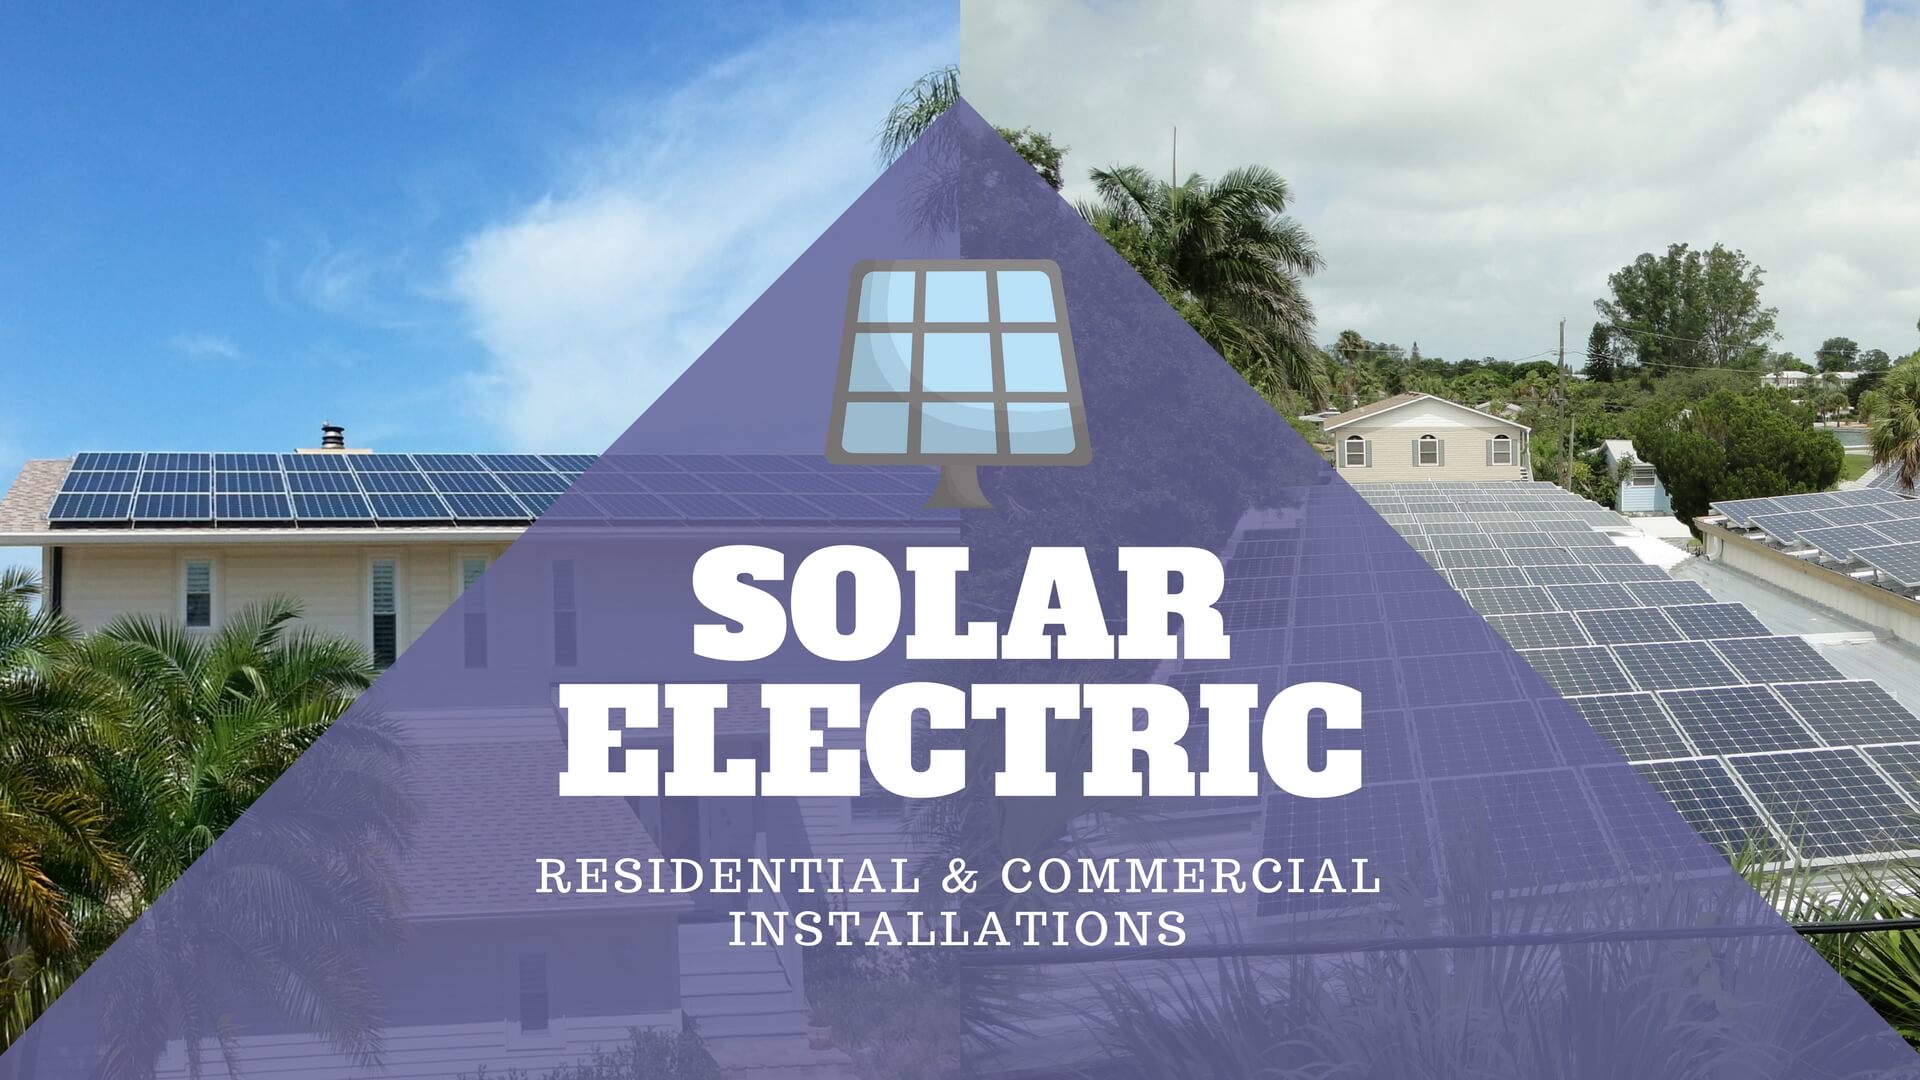 Solar Electric, Residential and Commercial Solar Electric Equipment and Installation Services